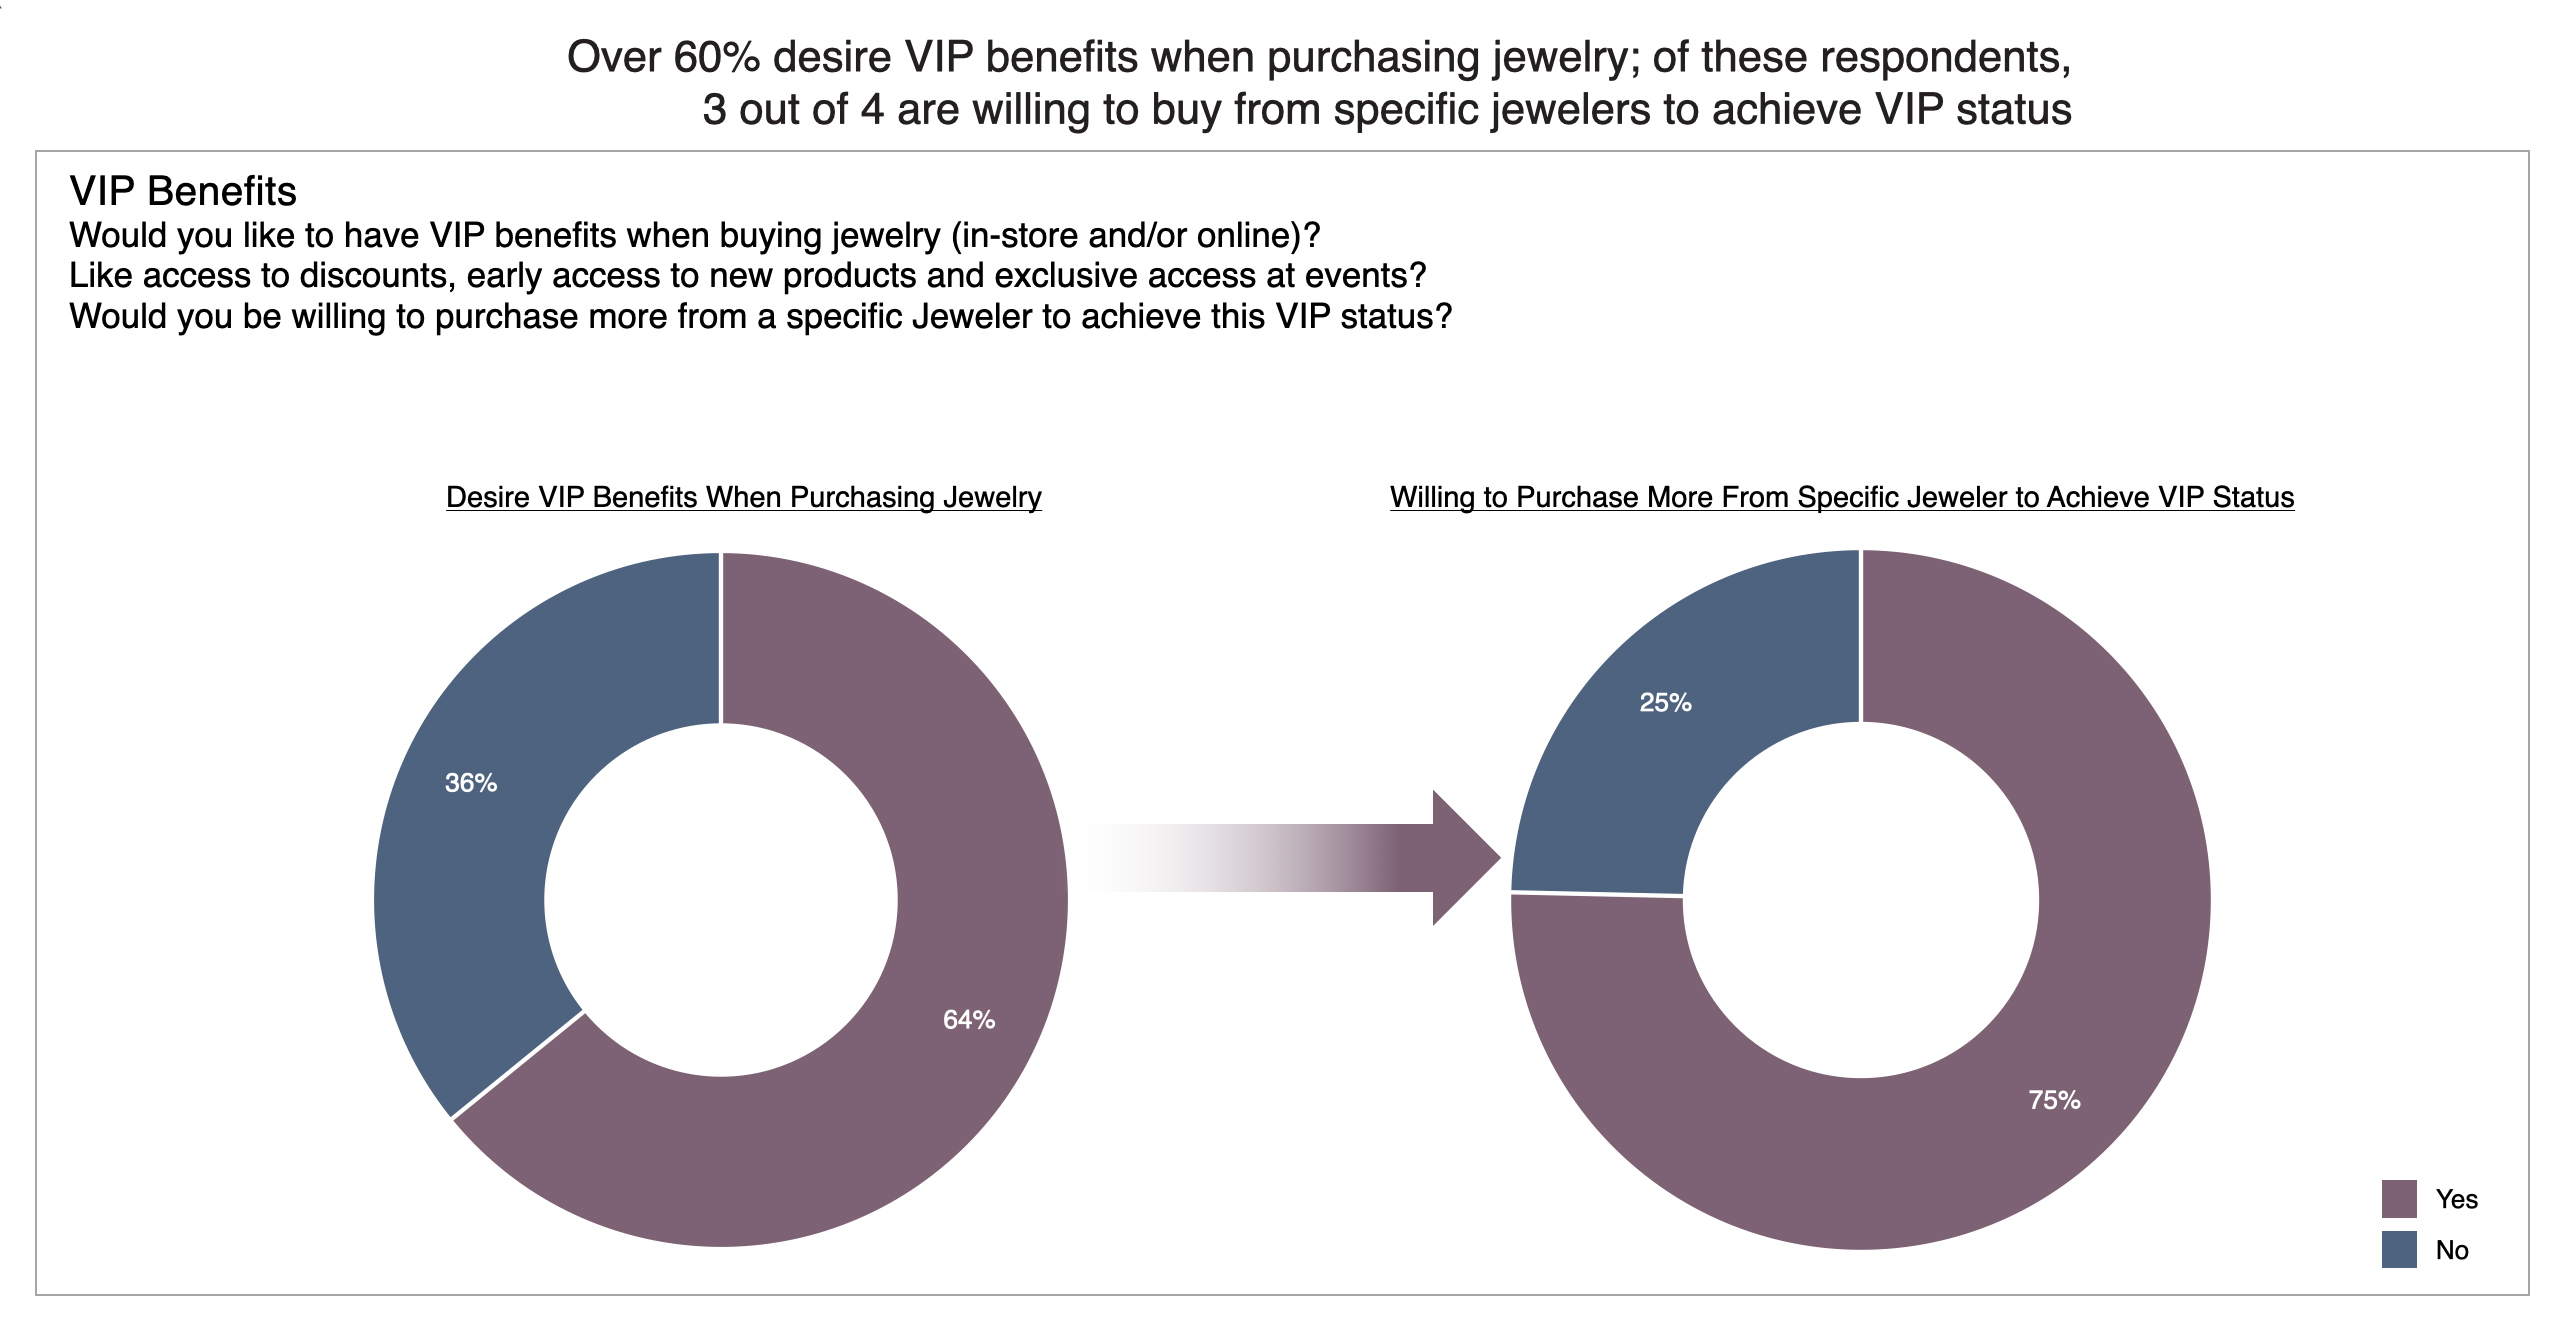 These Are the Retail Characteristics Most Important to Jewelry Consumers, According to Study